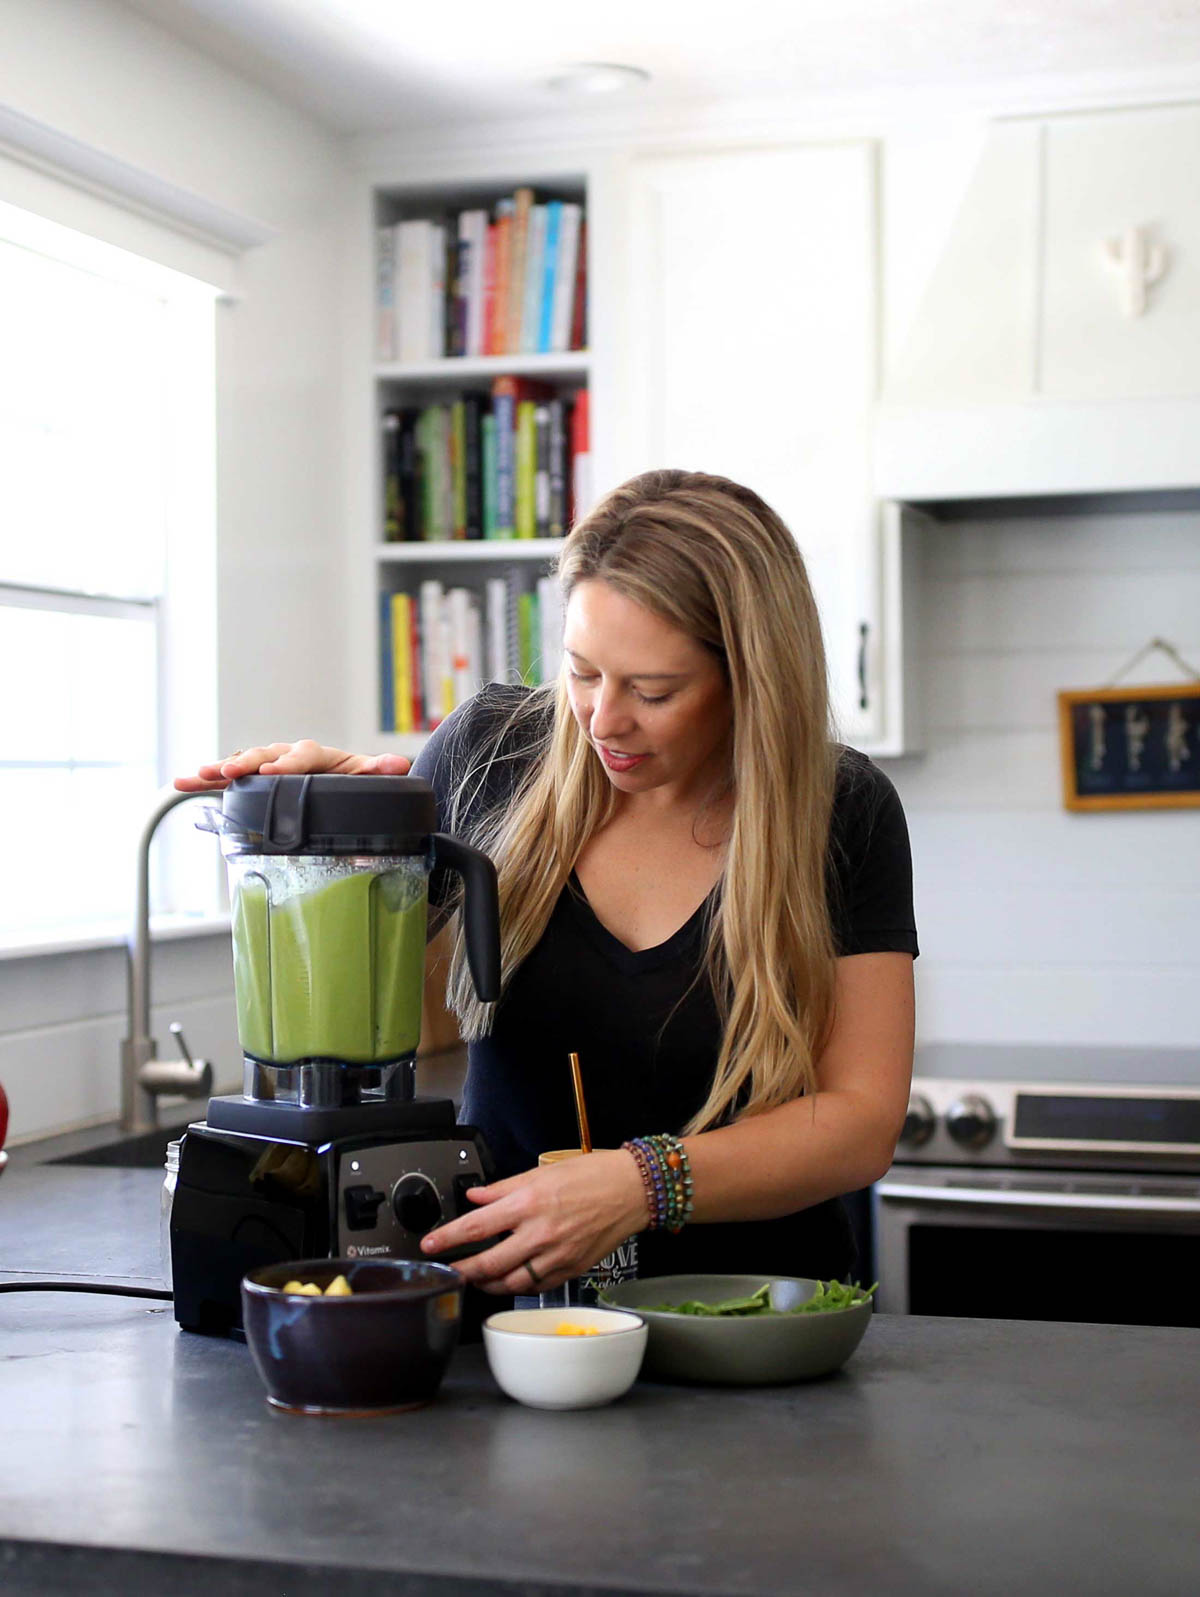 white woman using a black Vitamix blender to blend a green smoothie, next to 3 bowls on a kitchen counter.